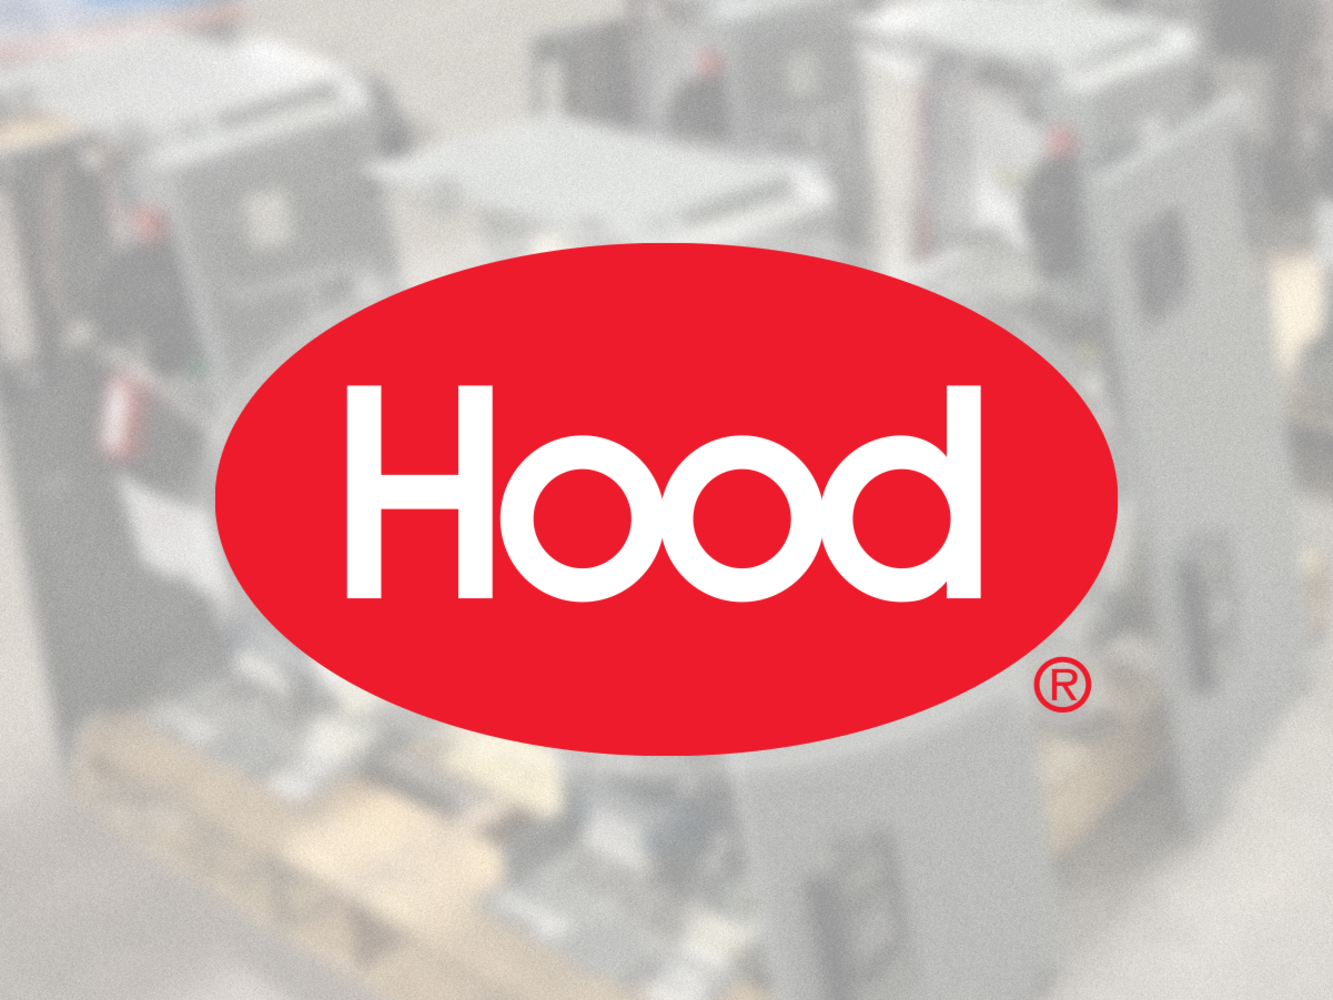 Process and Production Support Components Surplus to HP Hood Dairy